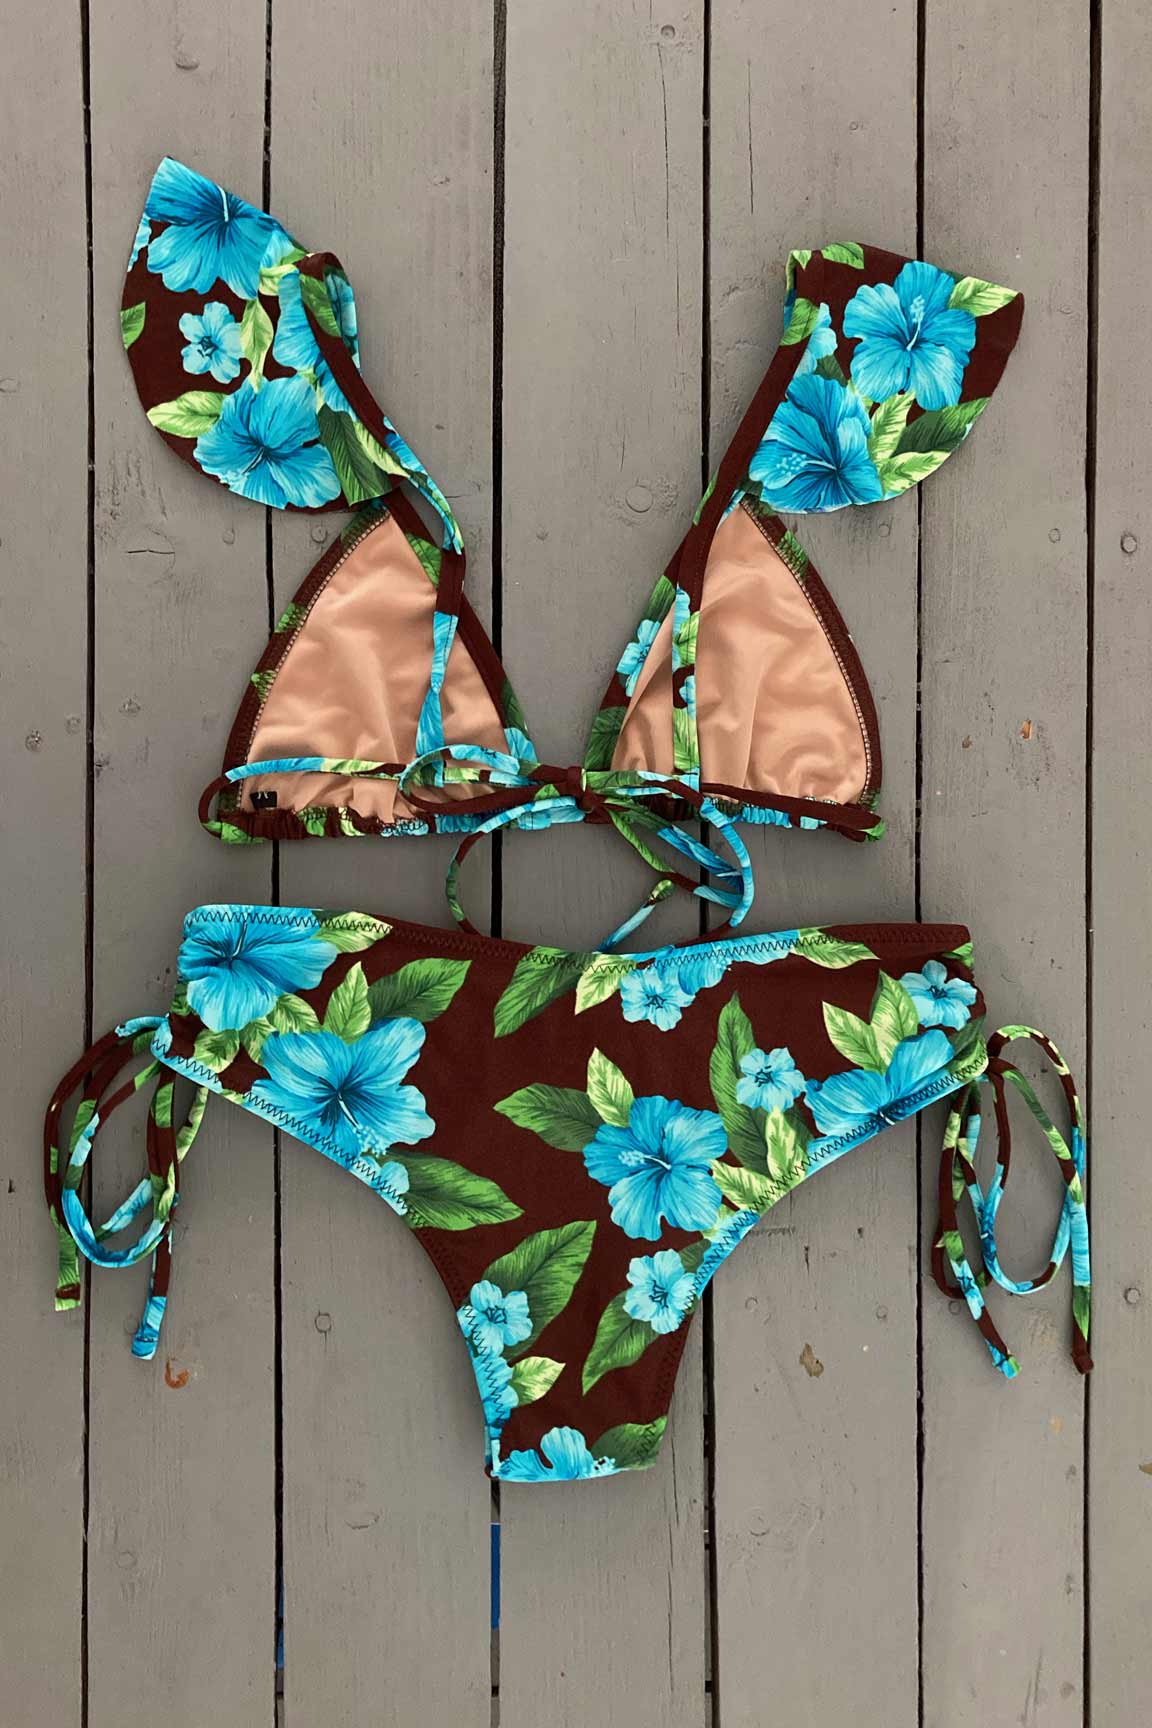 Get that tropical feeling in this triangle bikini top with ruffle accent. illes Bikinis swimwear lets women feel sexy, confident, glamorous, and comfortable all at the same time. They are made with the finest quality of soft and stretchy Lycra to achieve the best fit. Find yours @JillesBikinis